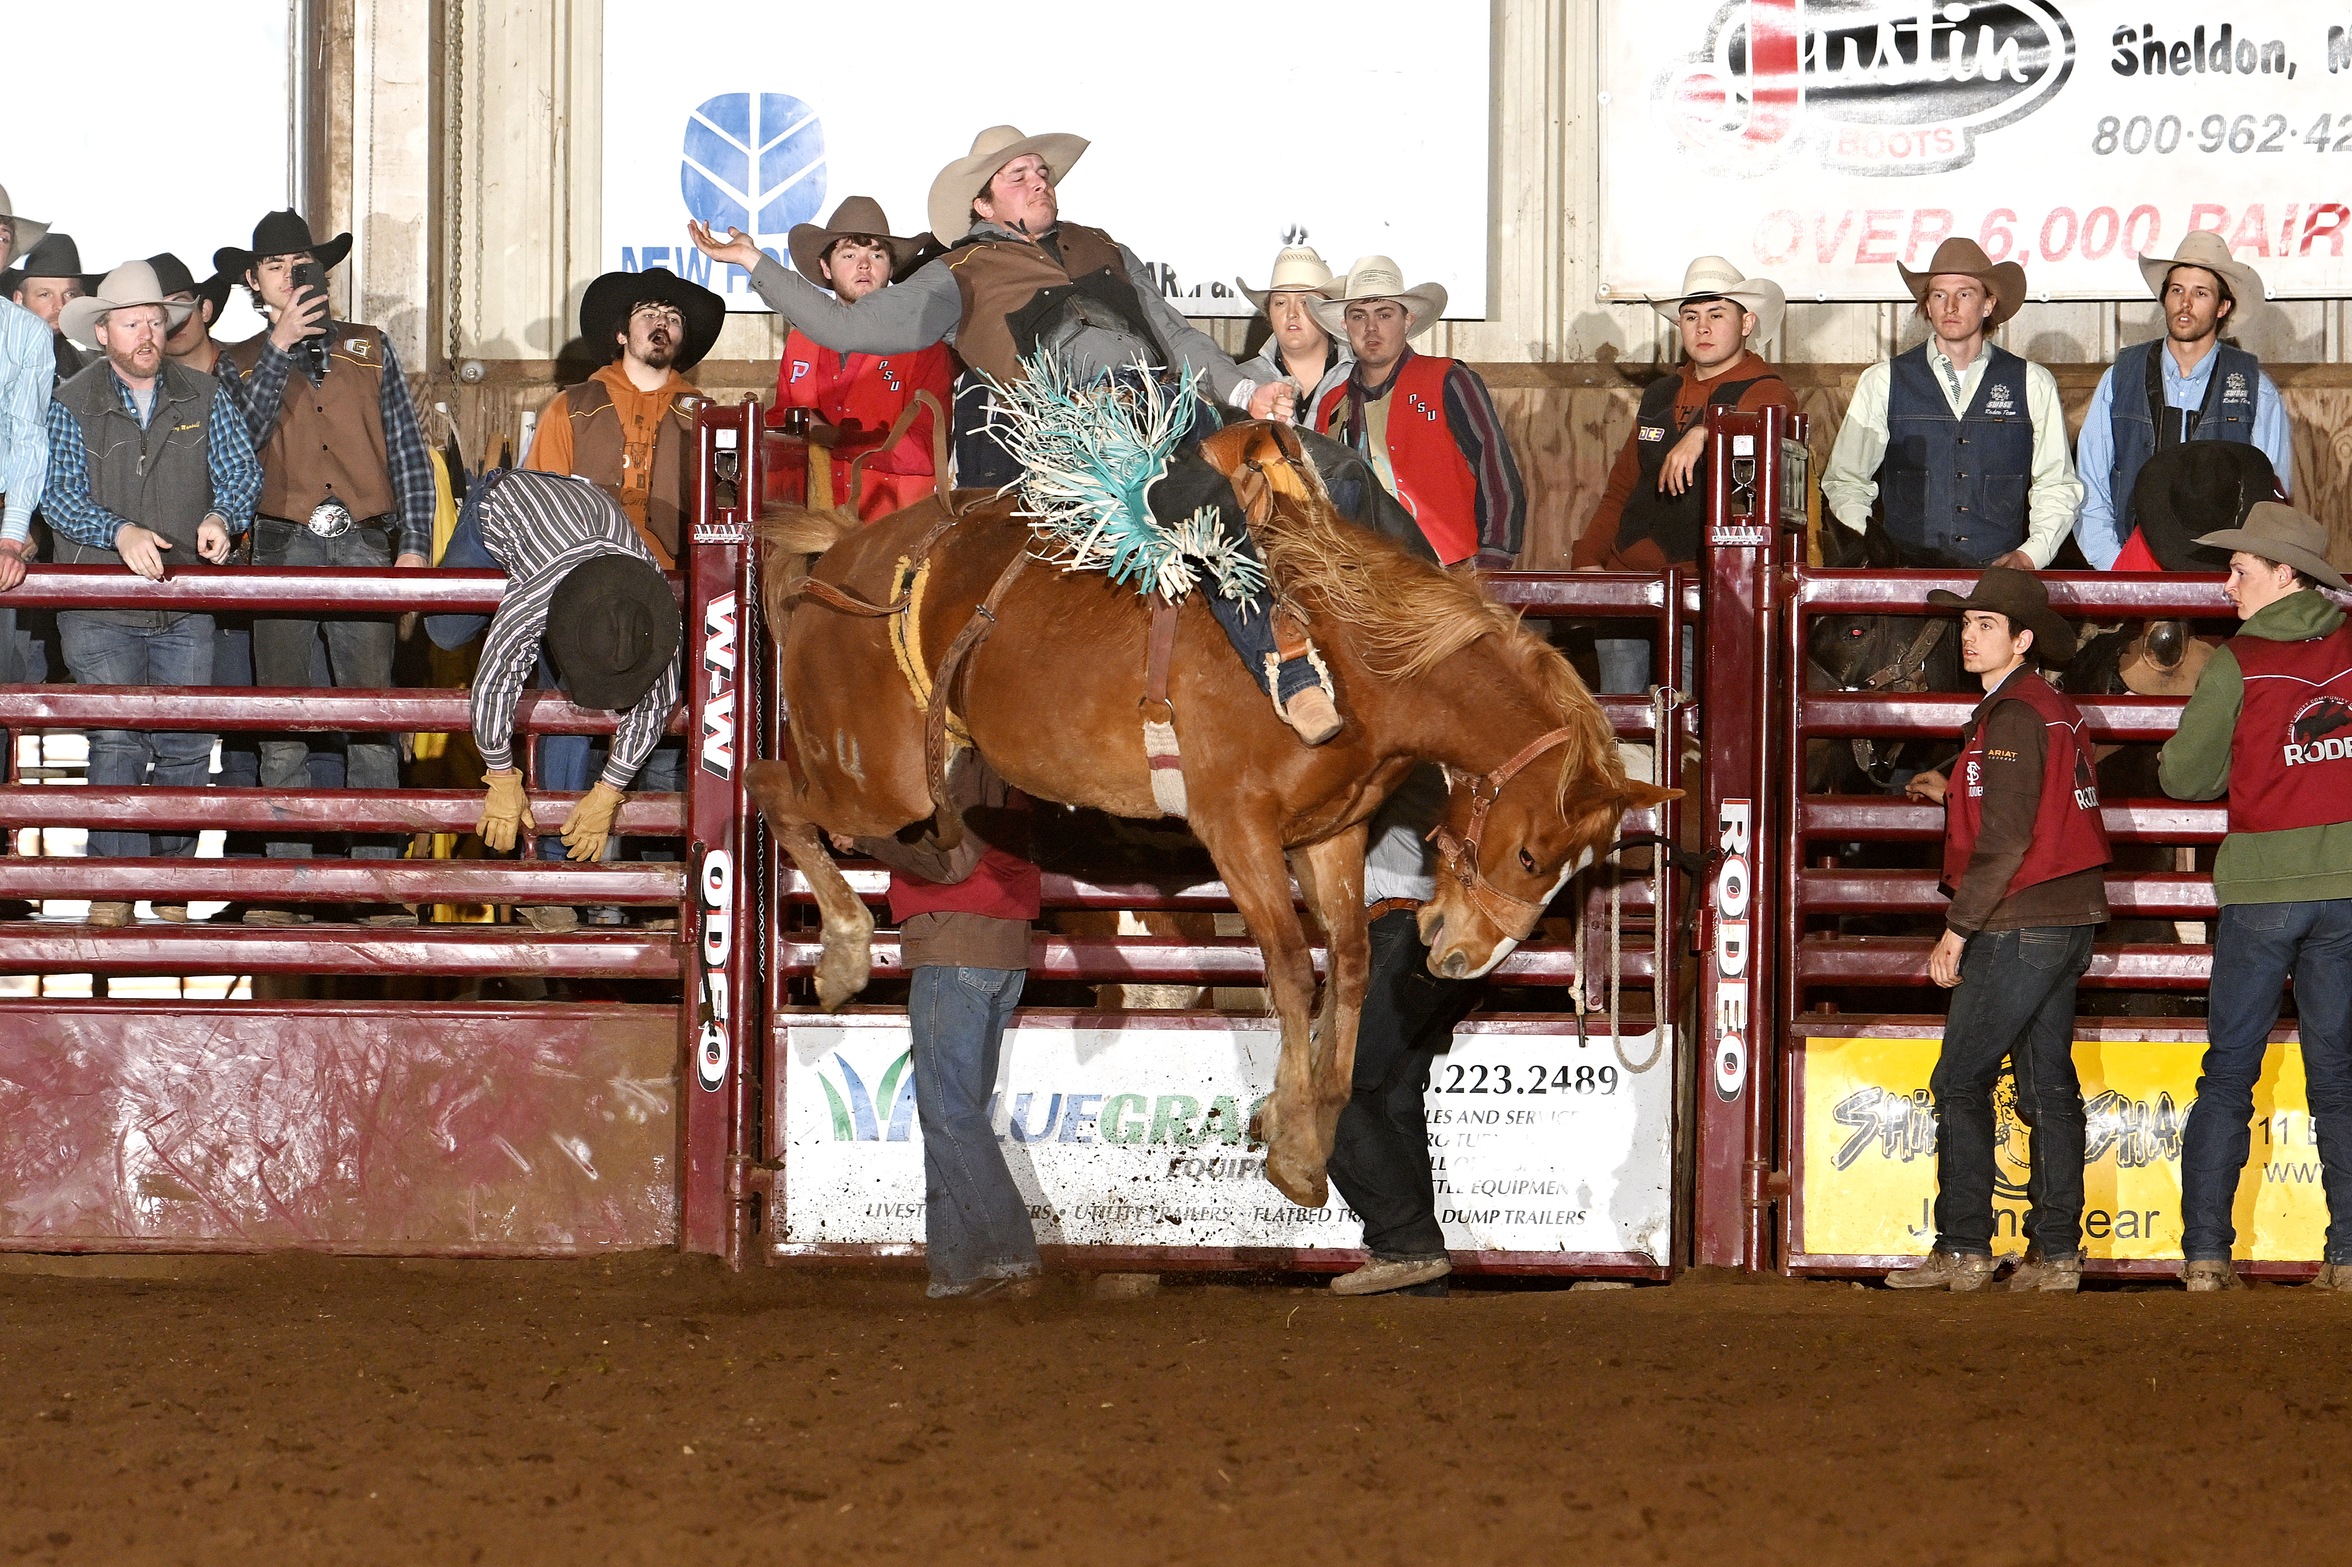 Broncbusters compete at Fort Scott Rodeo